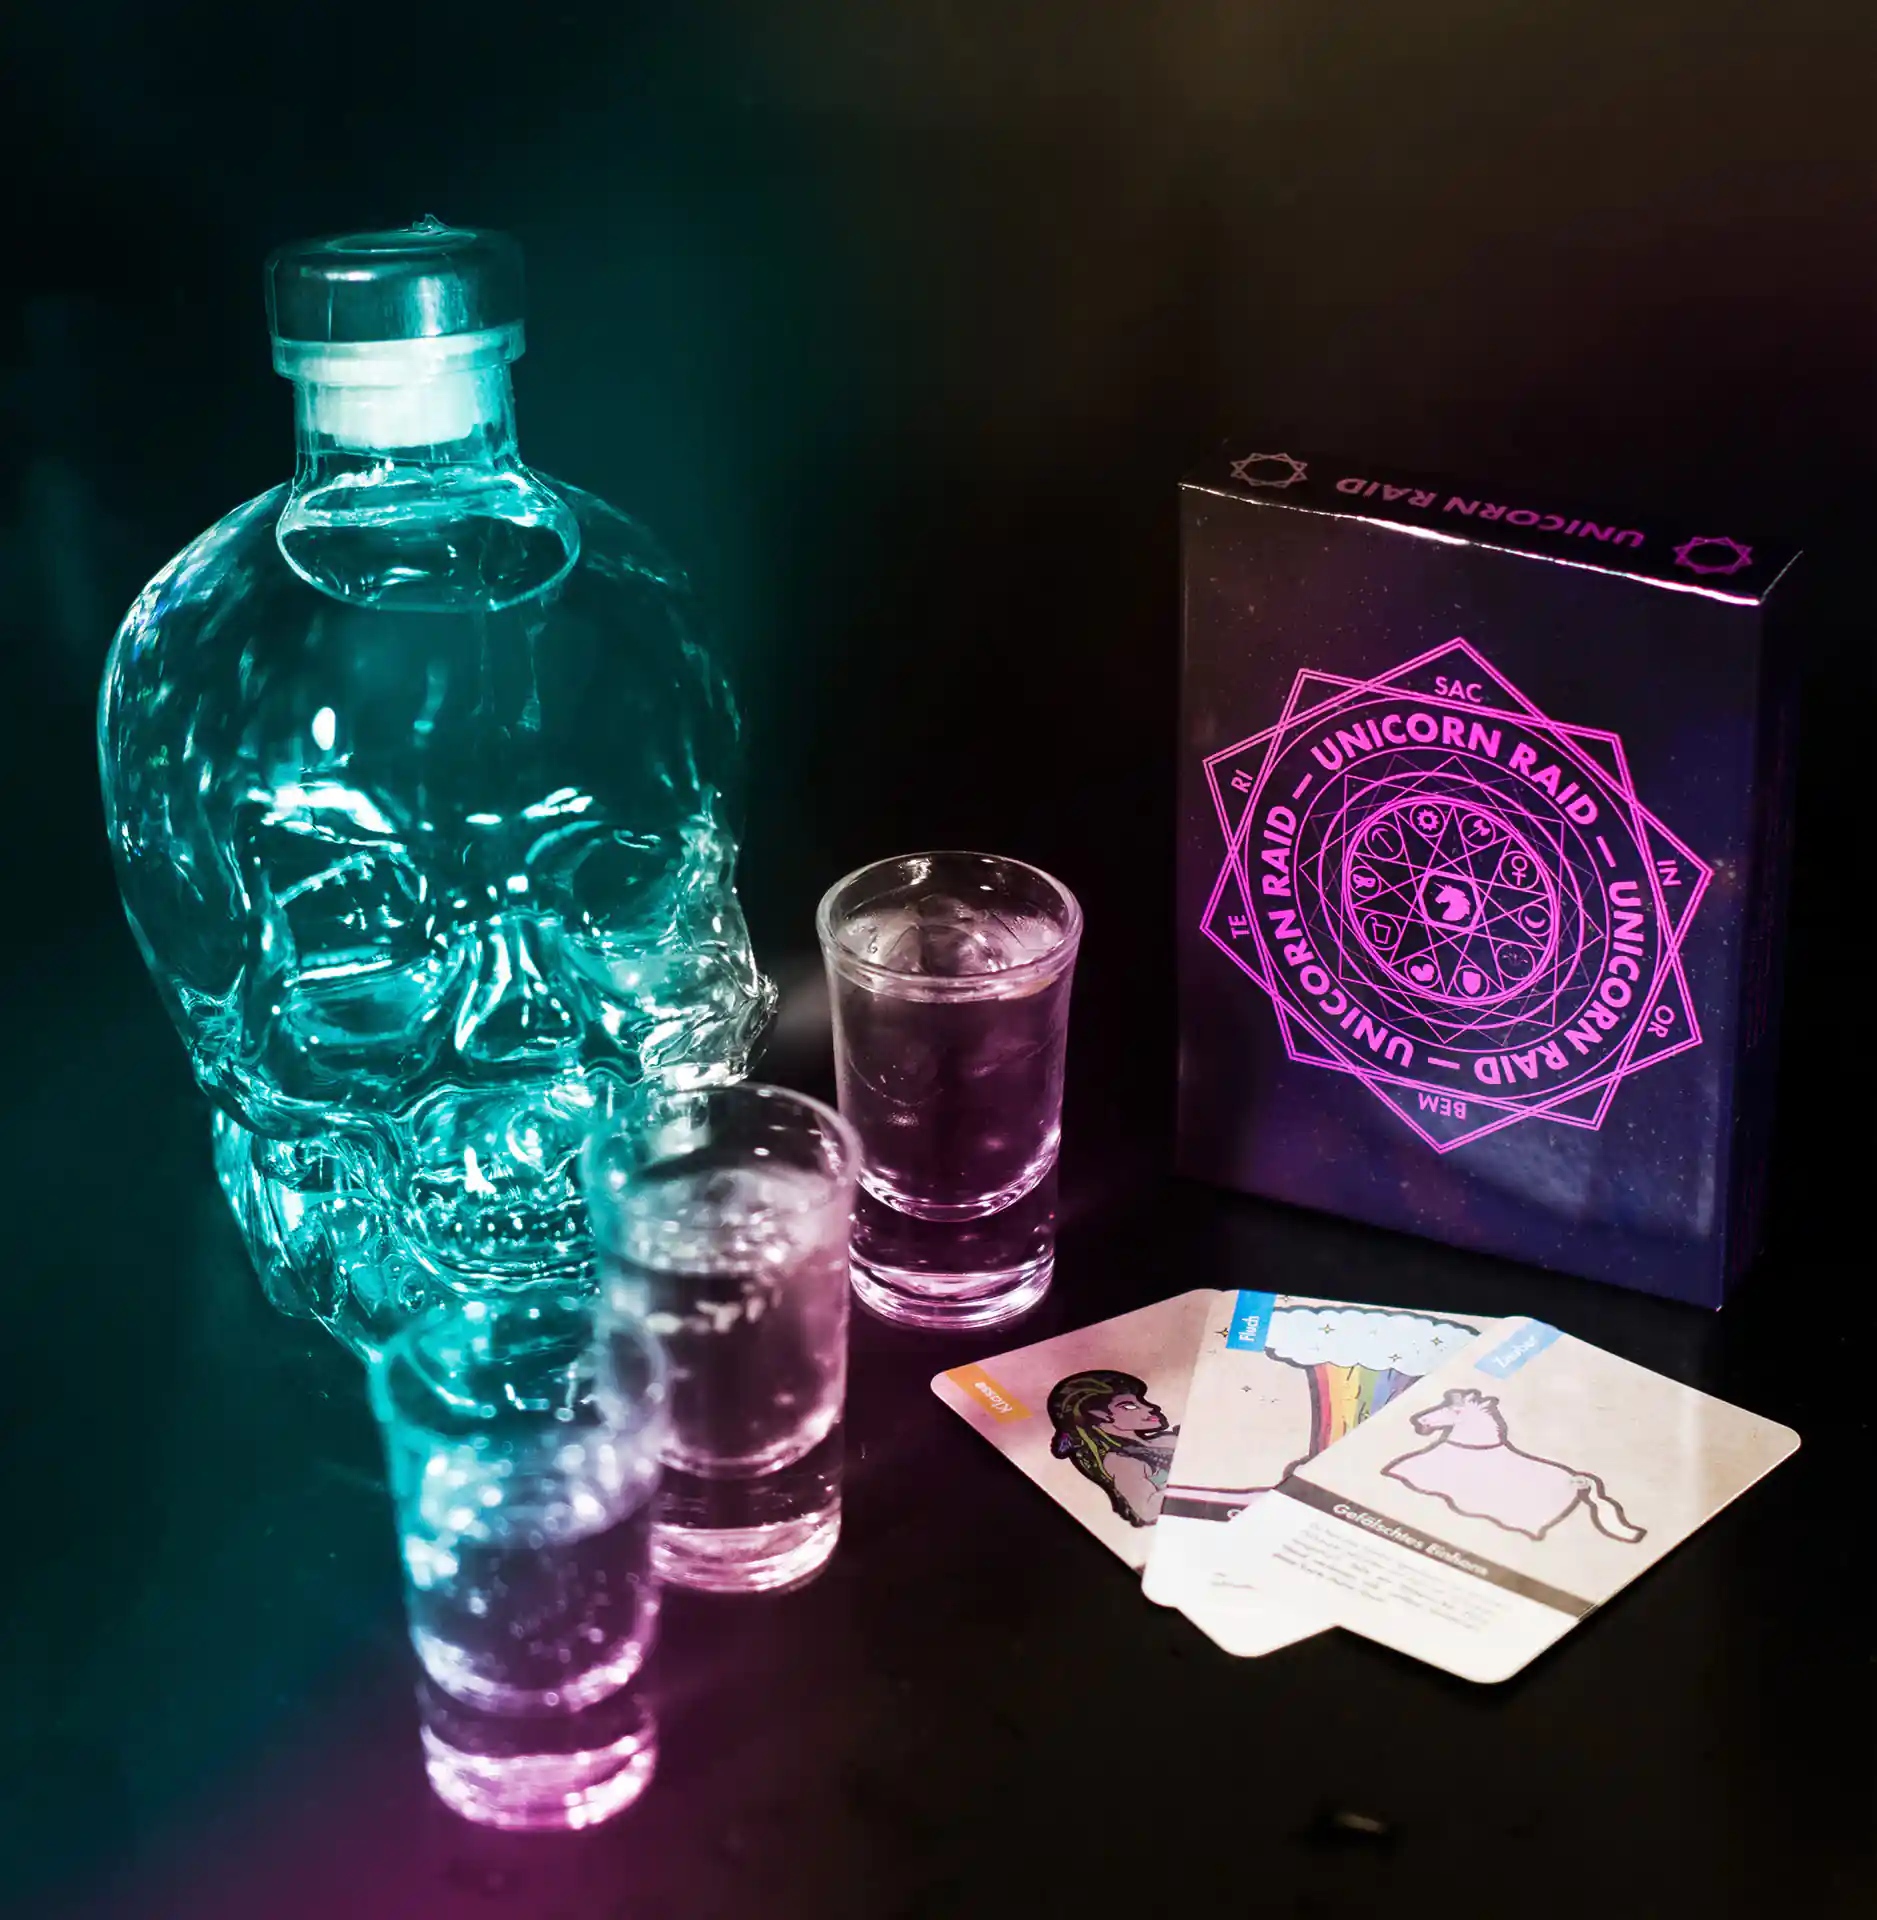 Some glasses as well as a bottle and the card game Unicorn Raid